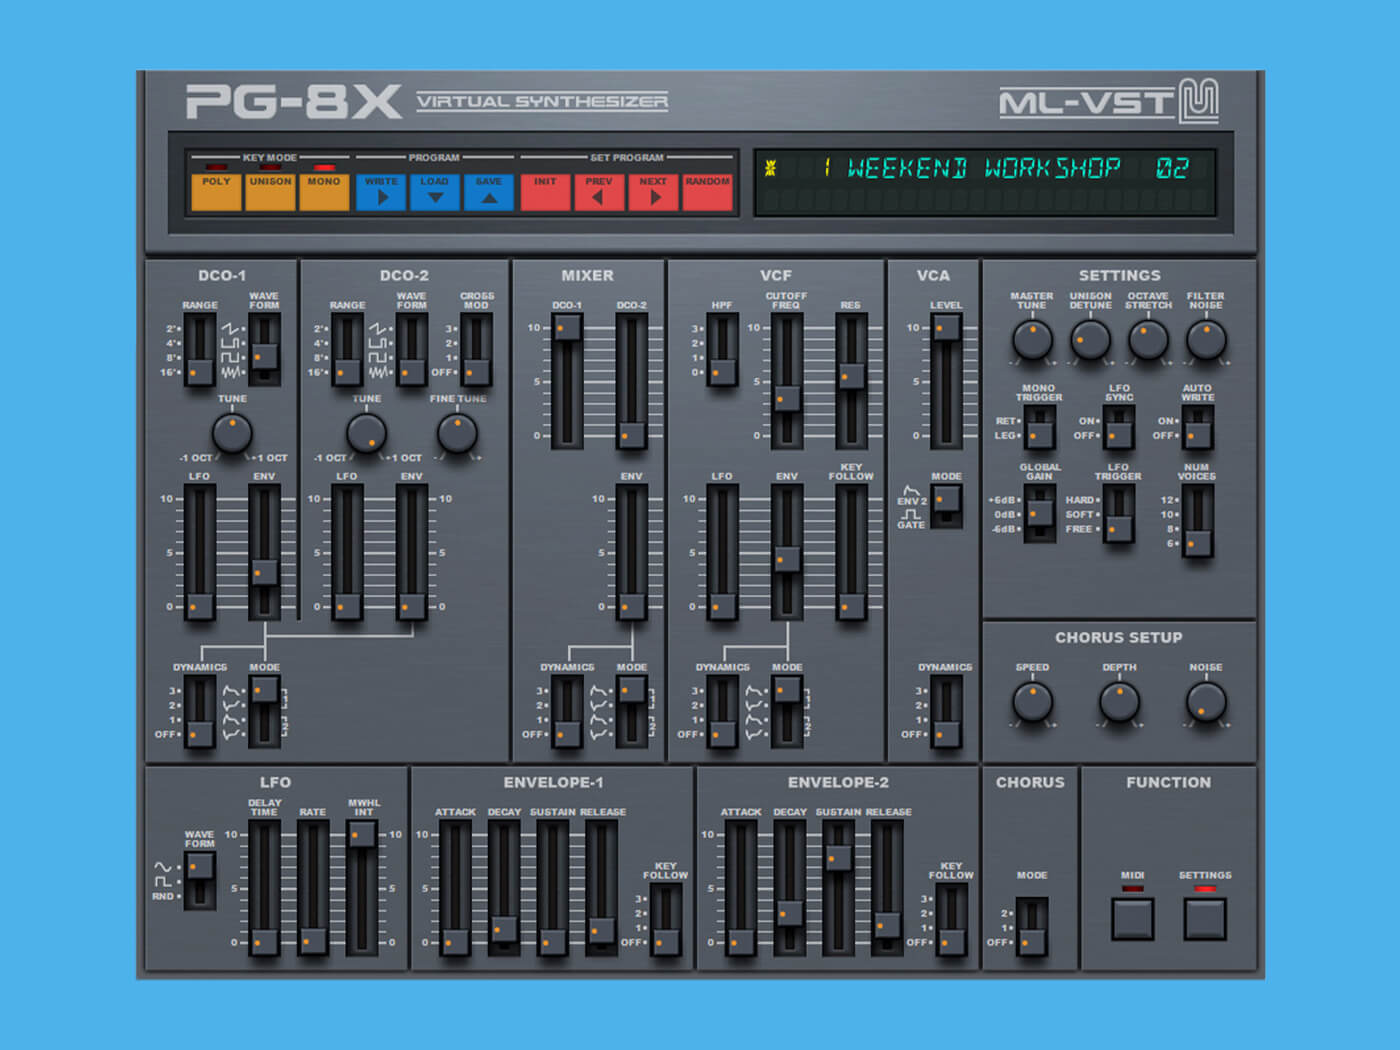 PG-8X softsynth, based on the Roland JX-3P